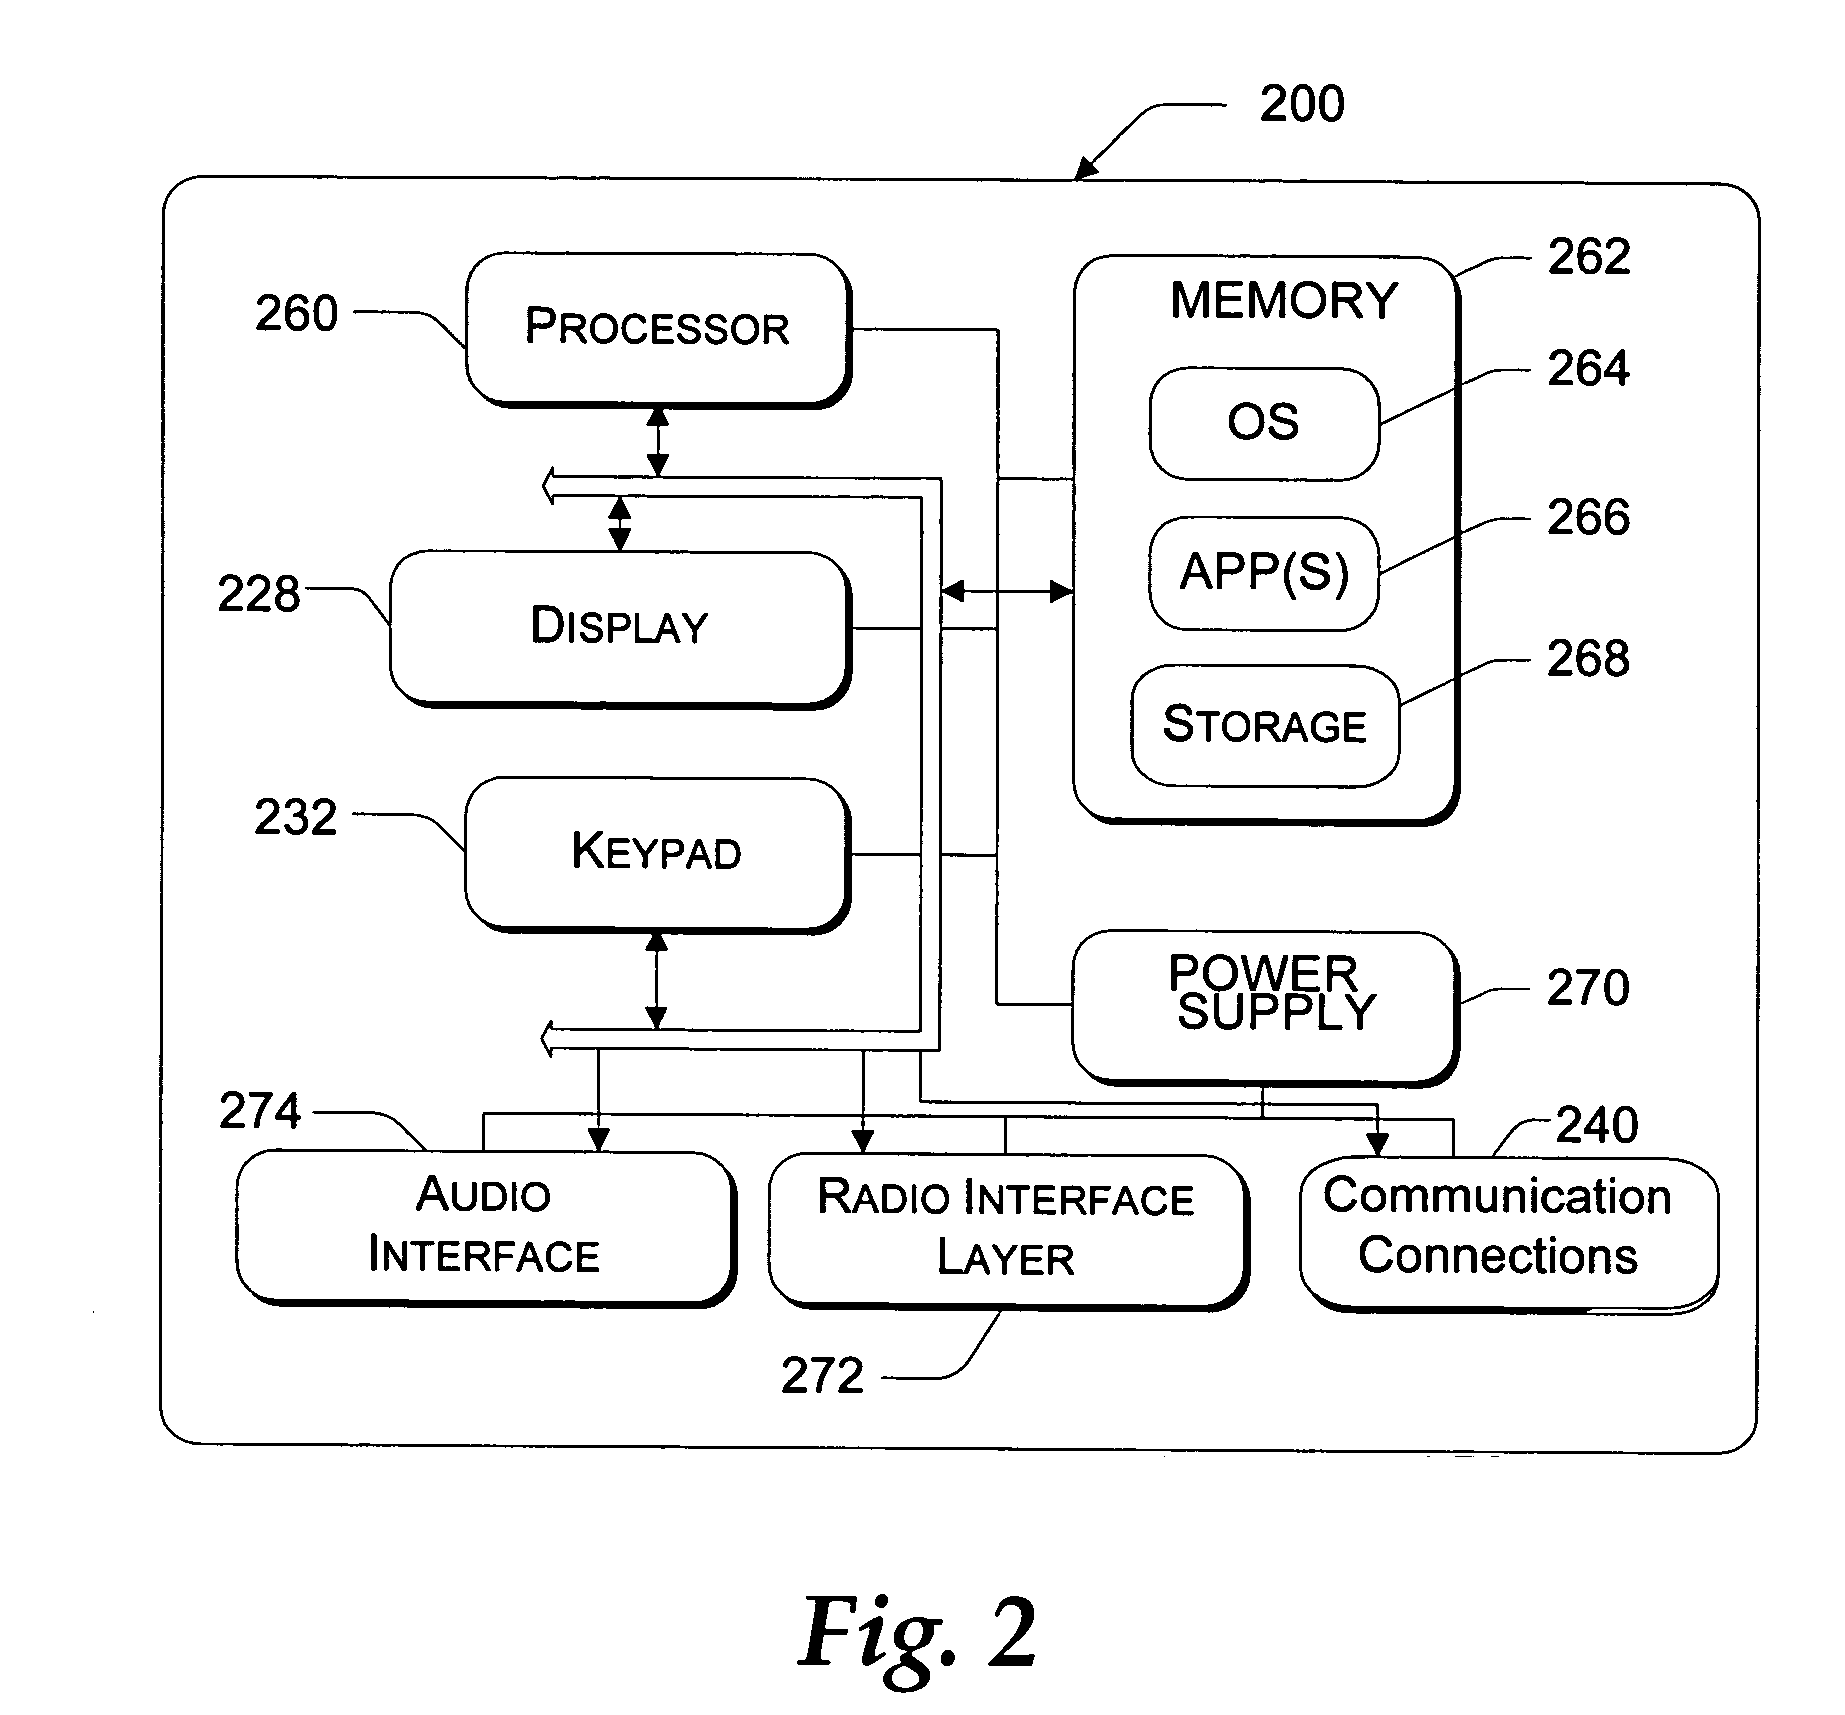 Flexible architecture for notifying applications of state changes